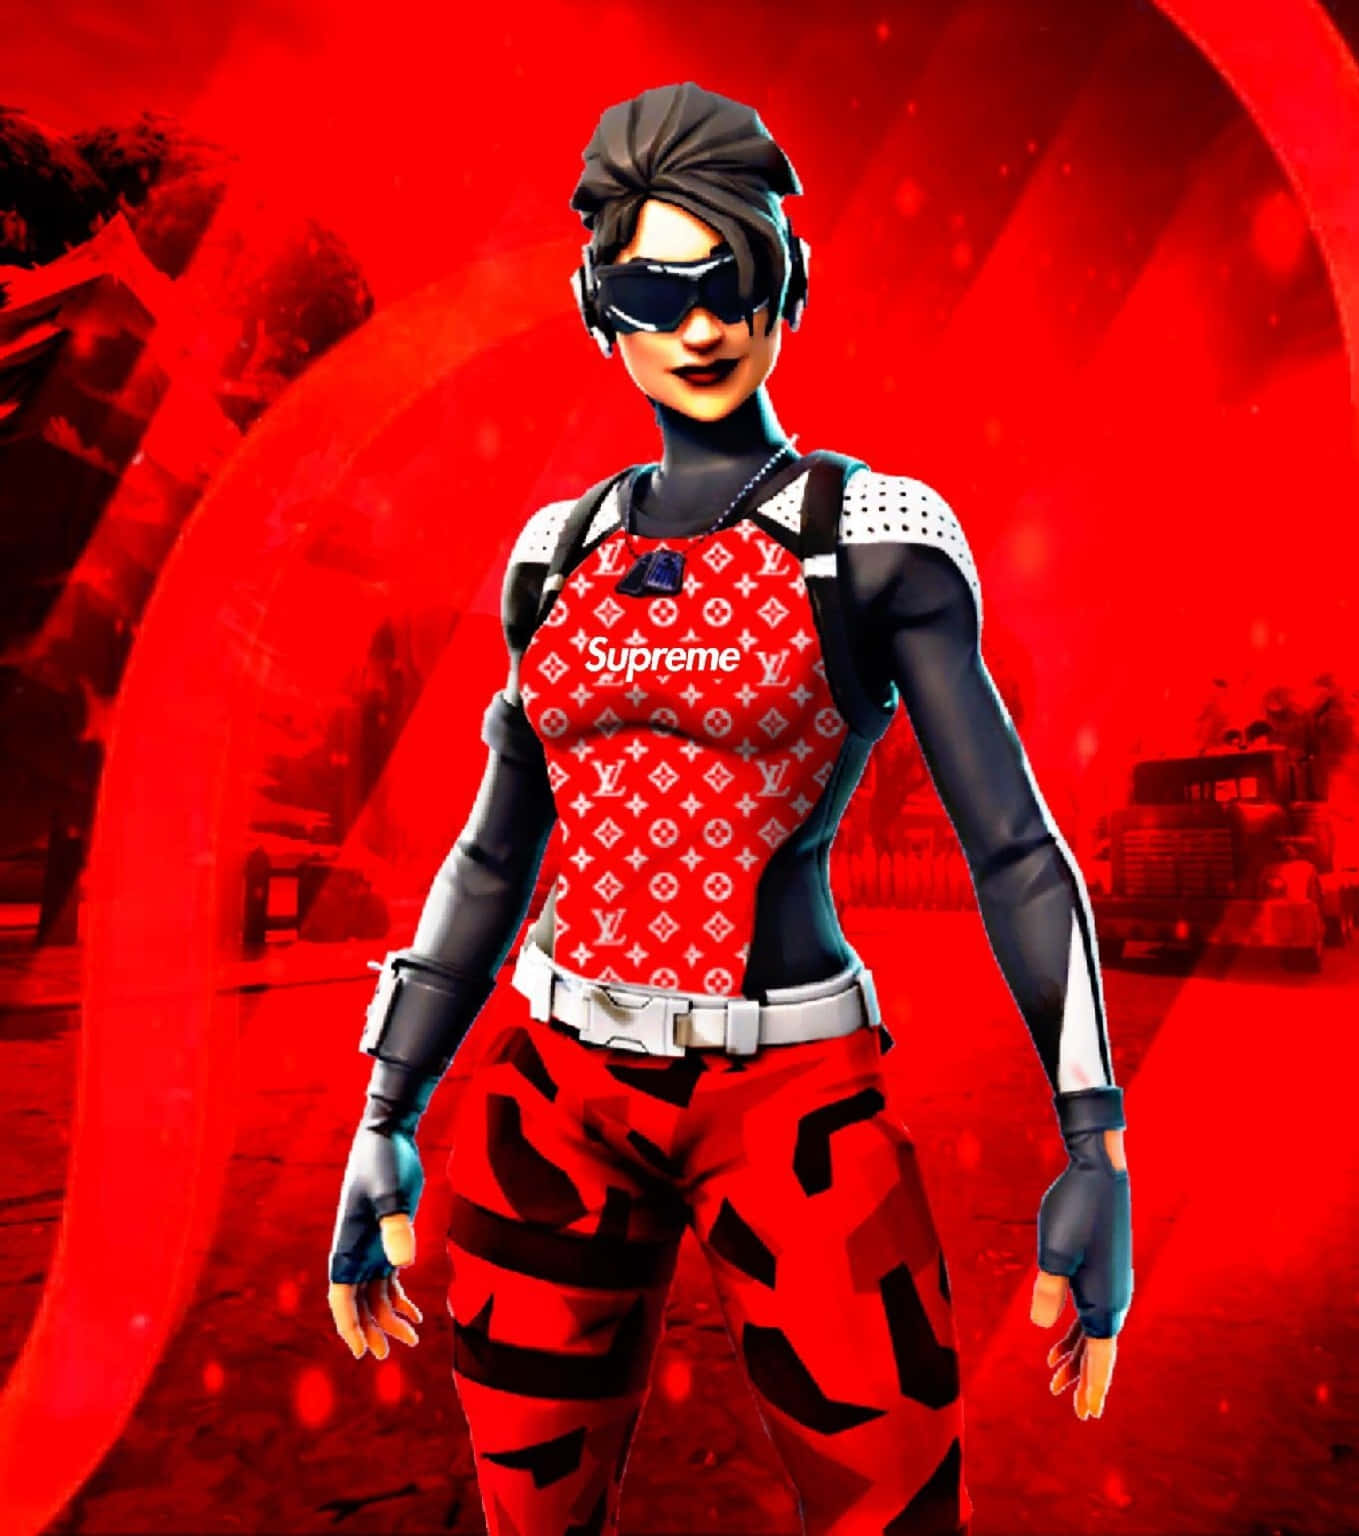 Details more than 68 drippy fortnite wallpapers latest - in.cdgdbentre